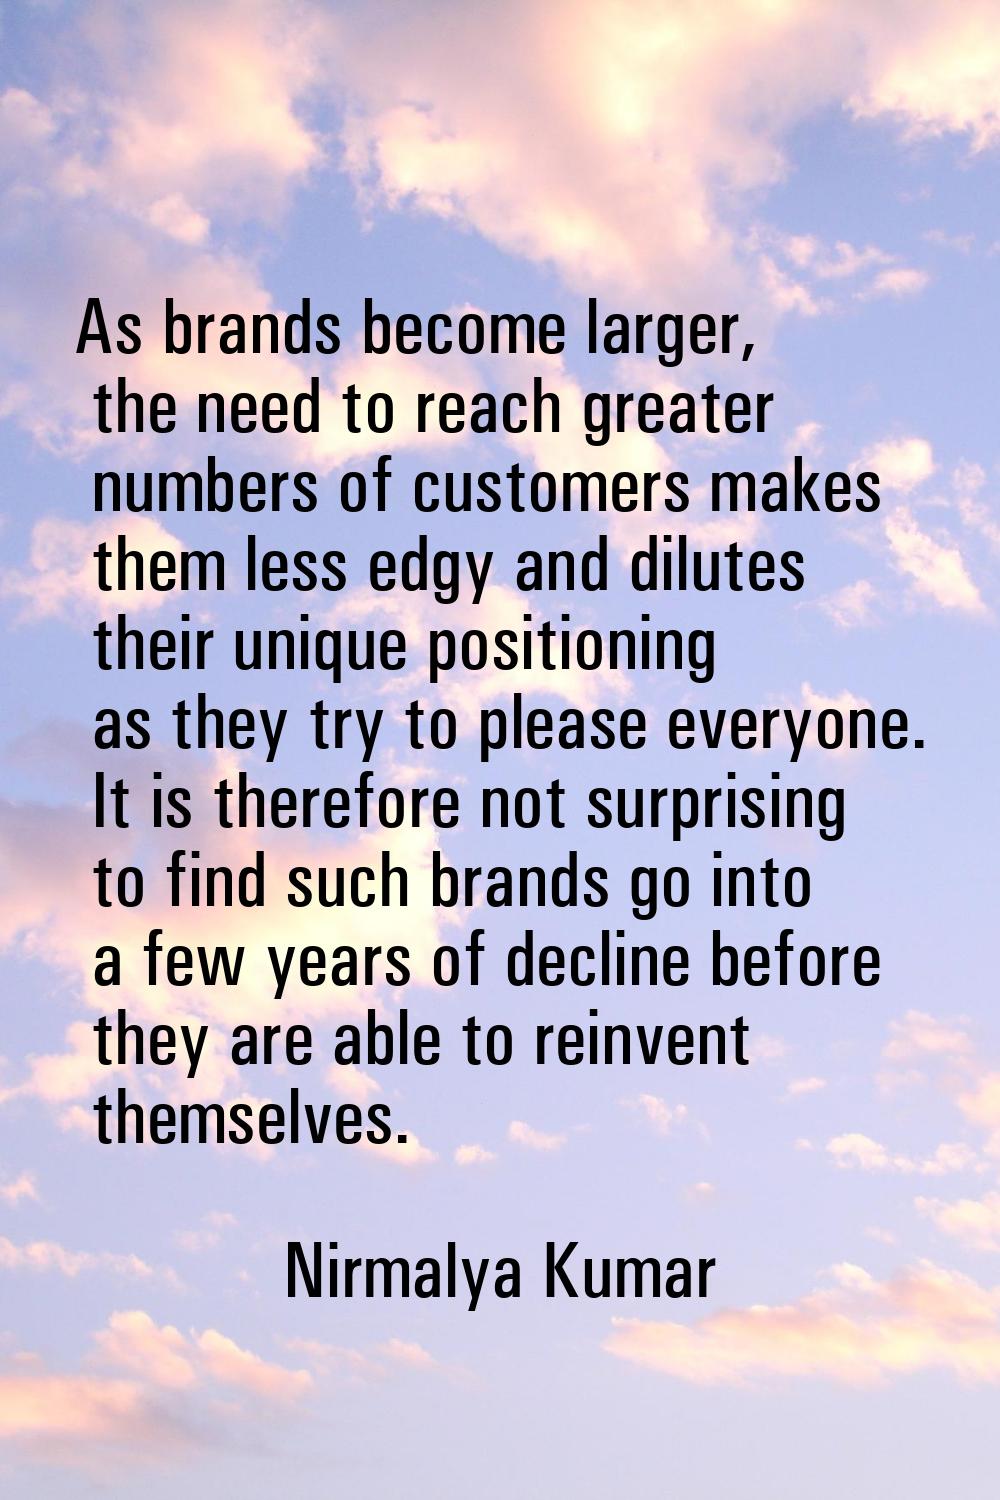 As brands become larger, the need to reach greater numbers of customers makes them less edgy and di